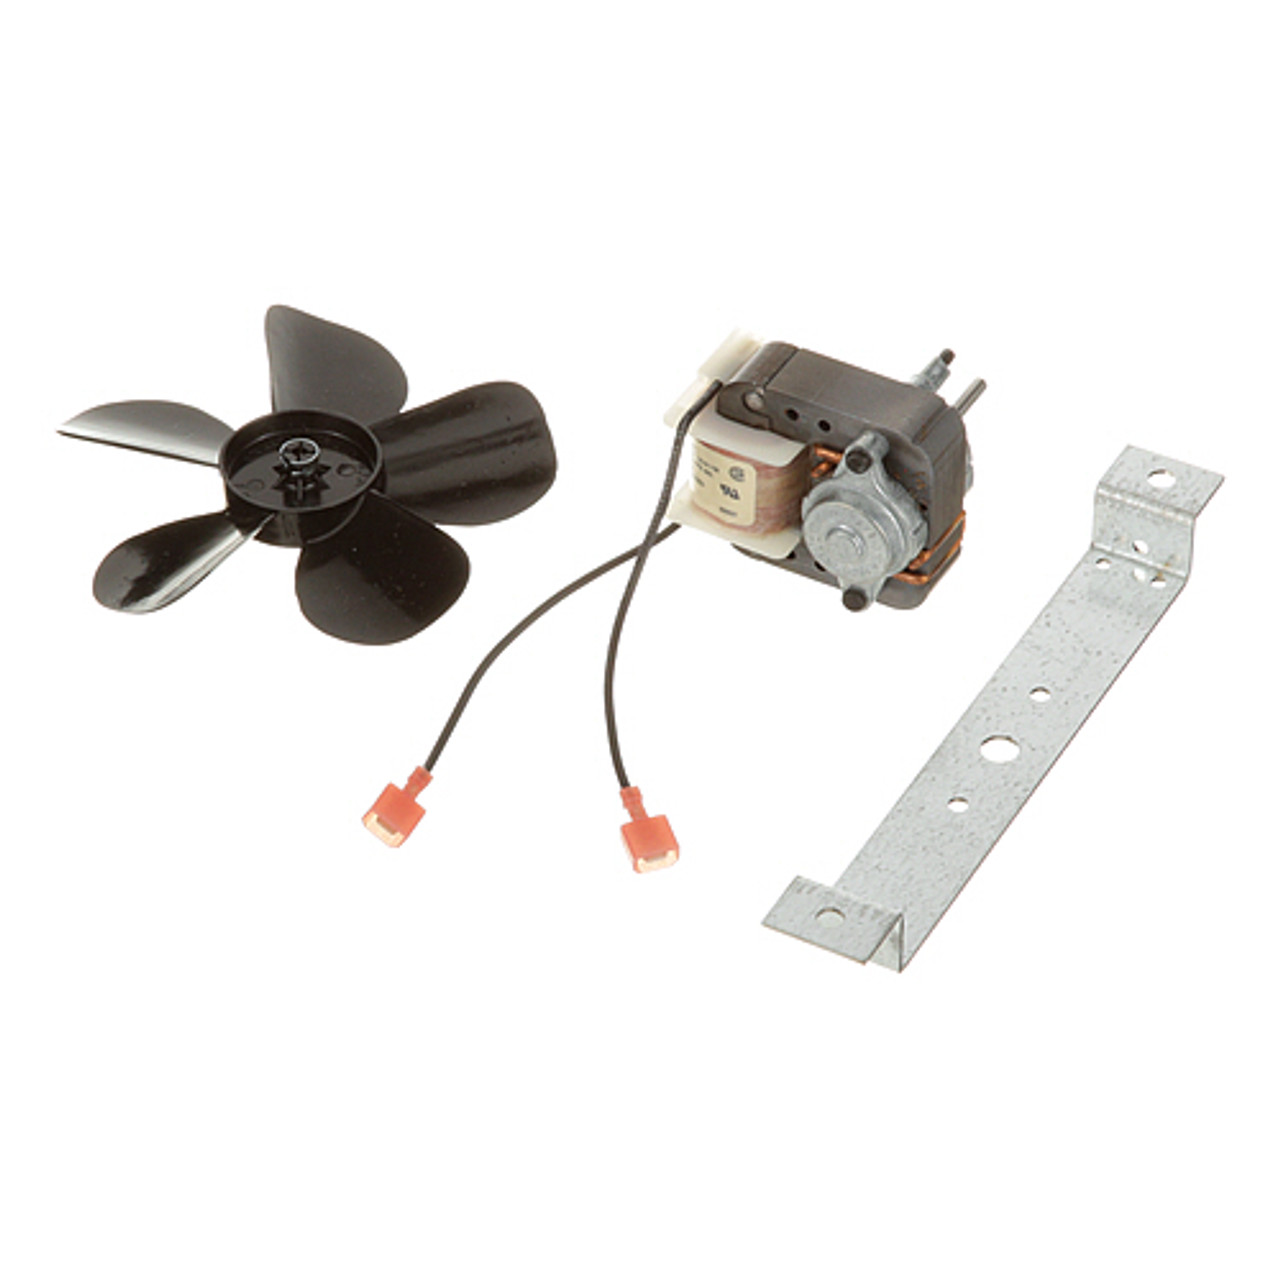 Fan Motor Assembly - Evap, 115V - Replacement Part For Traulsen SK900-60883-00